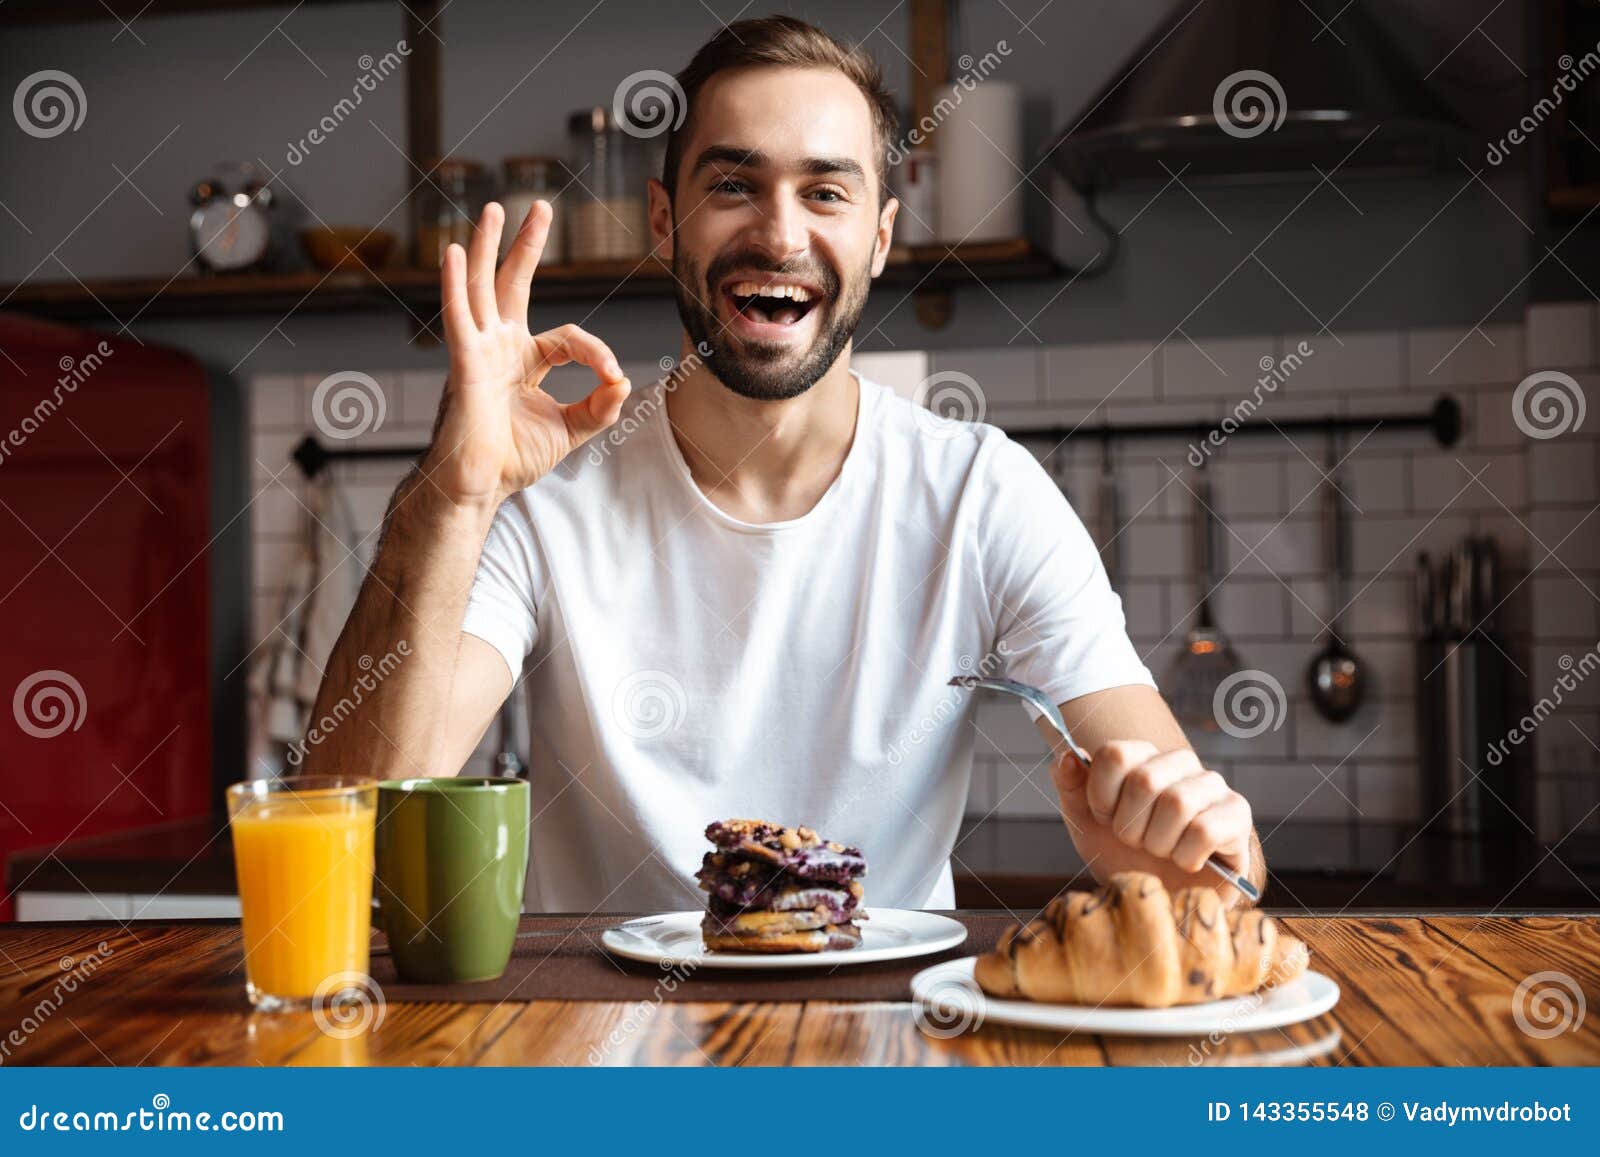 Portrait Of Handsome Man 30s Eating While Having Breakfast In Stylish